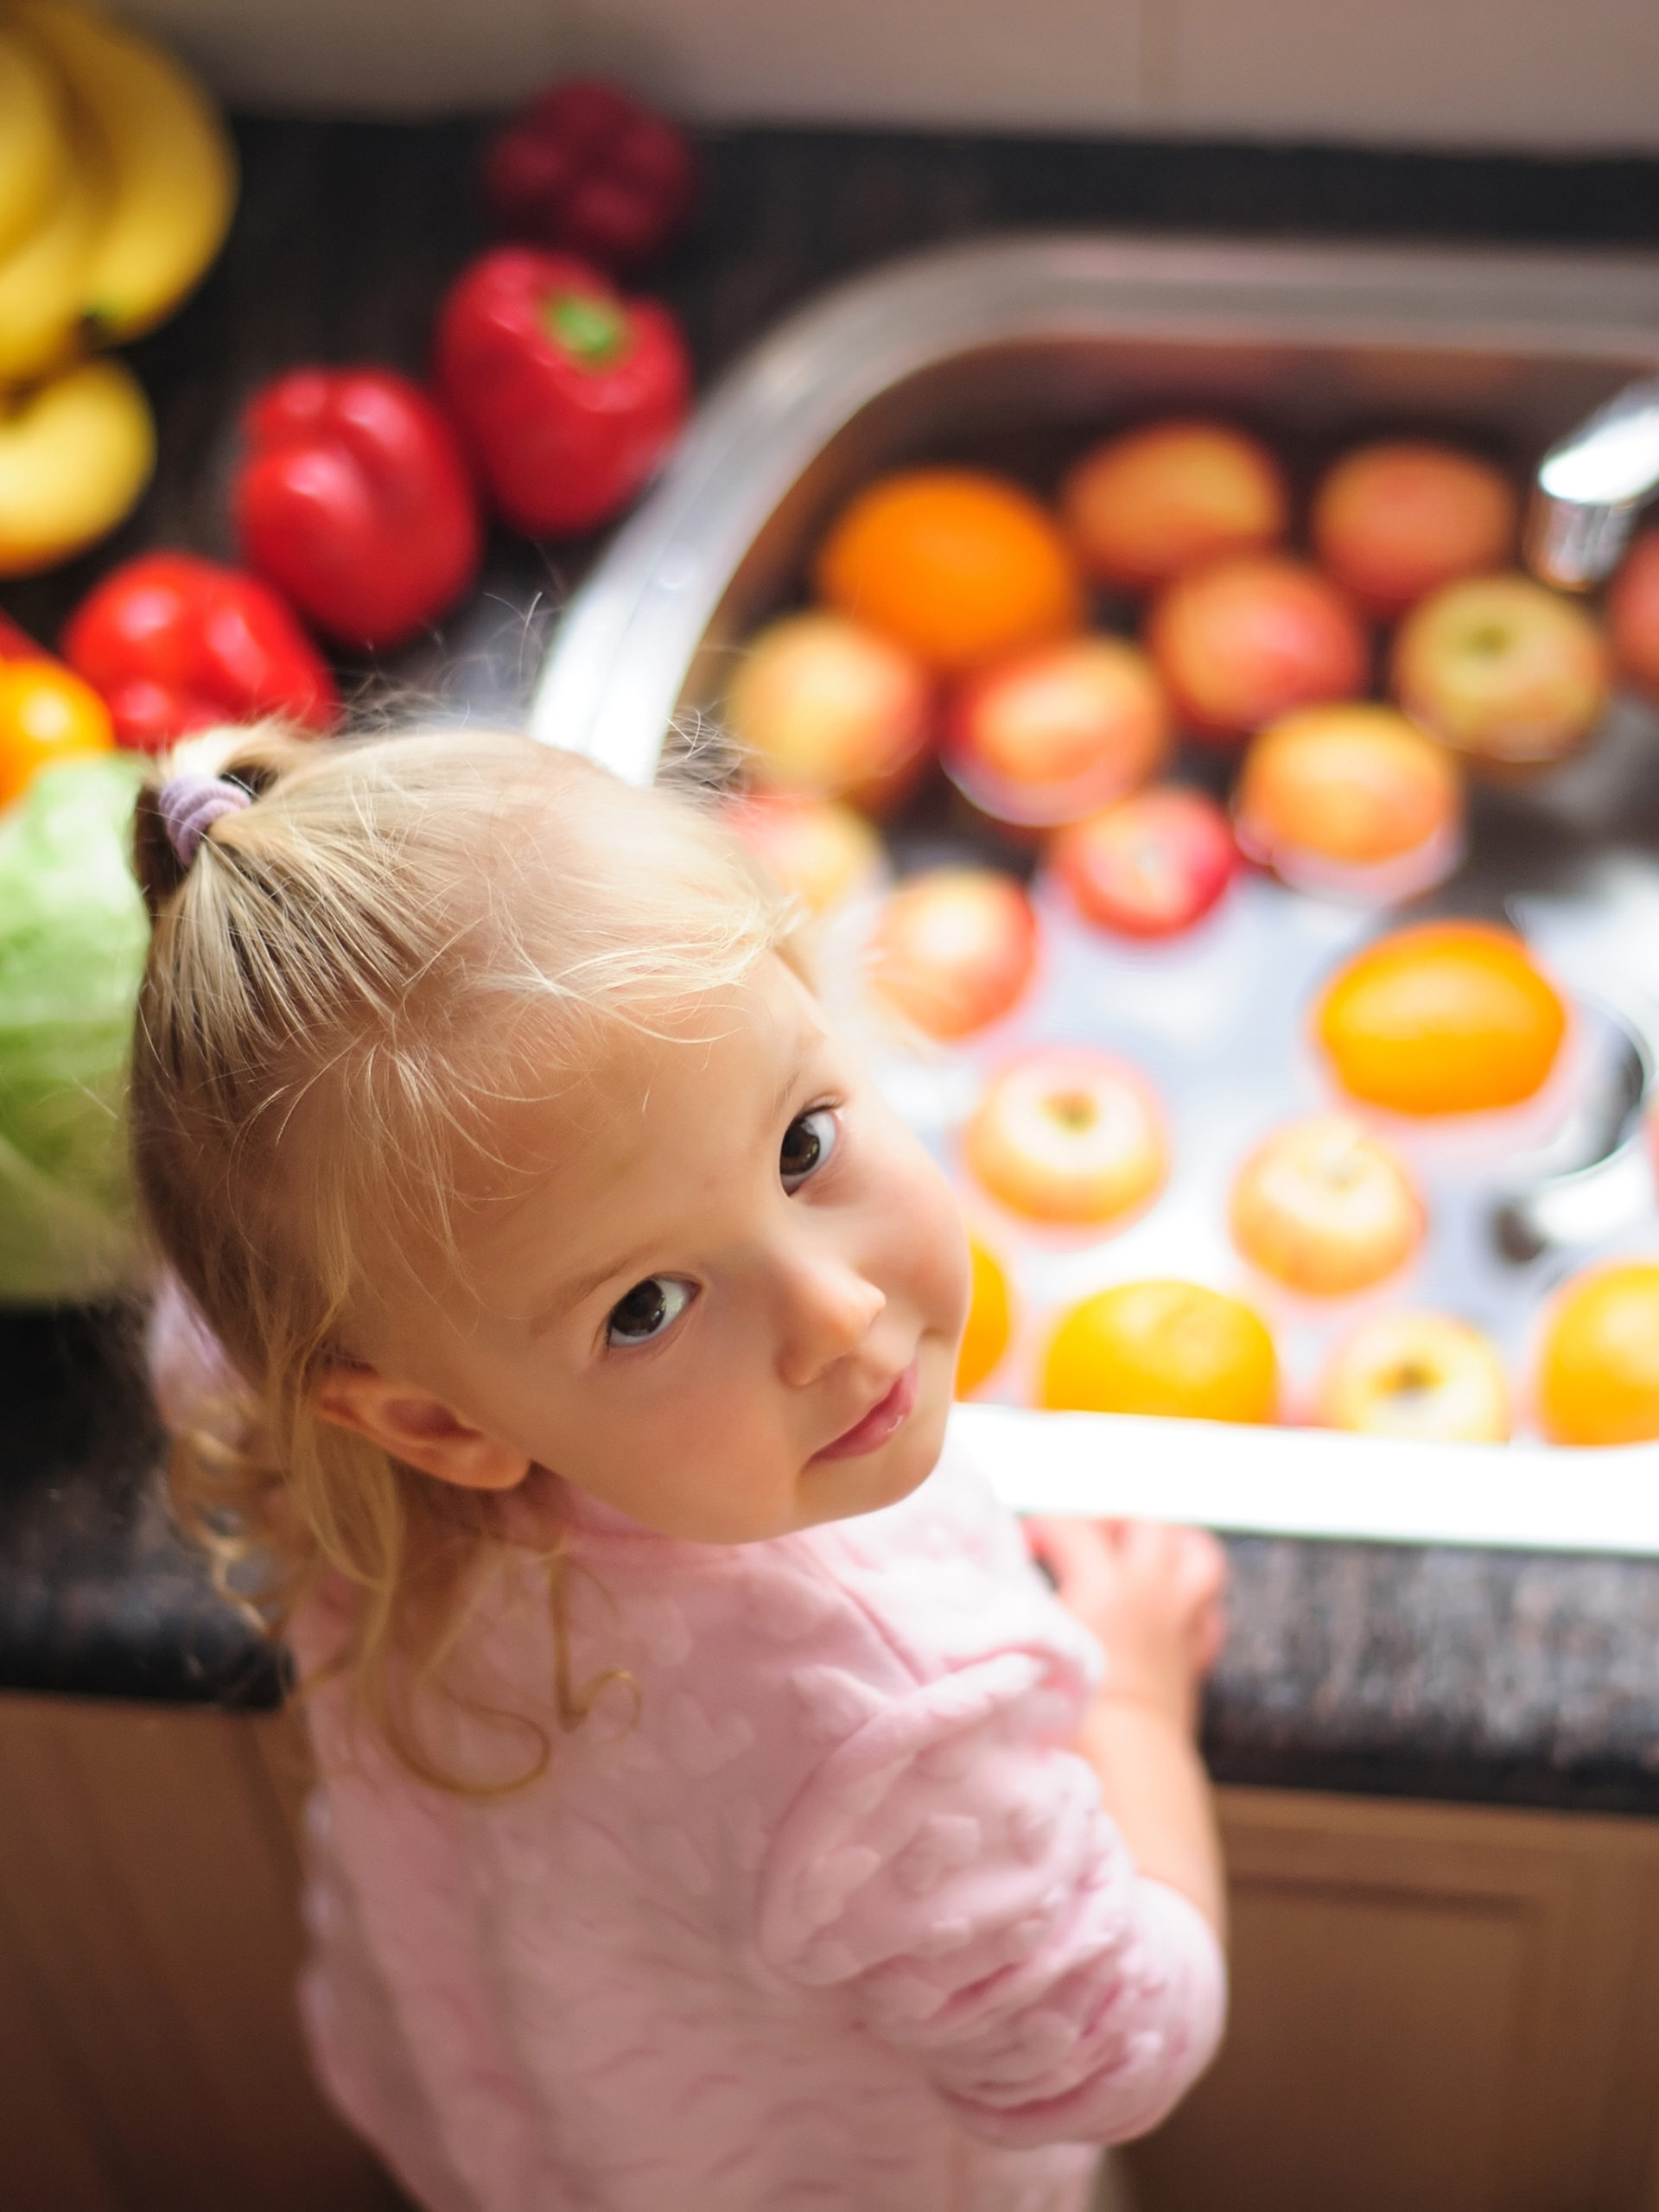 Little girl looks up with sink of veggies behind her